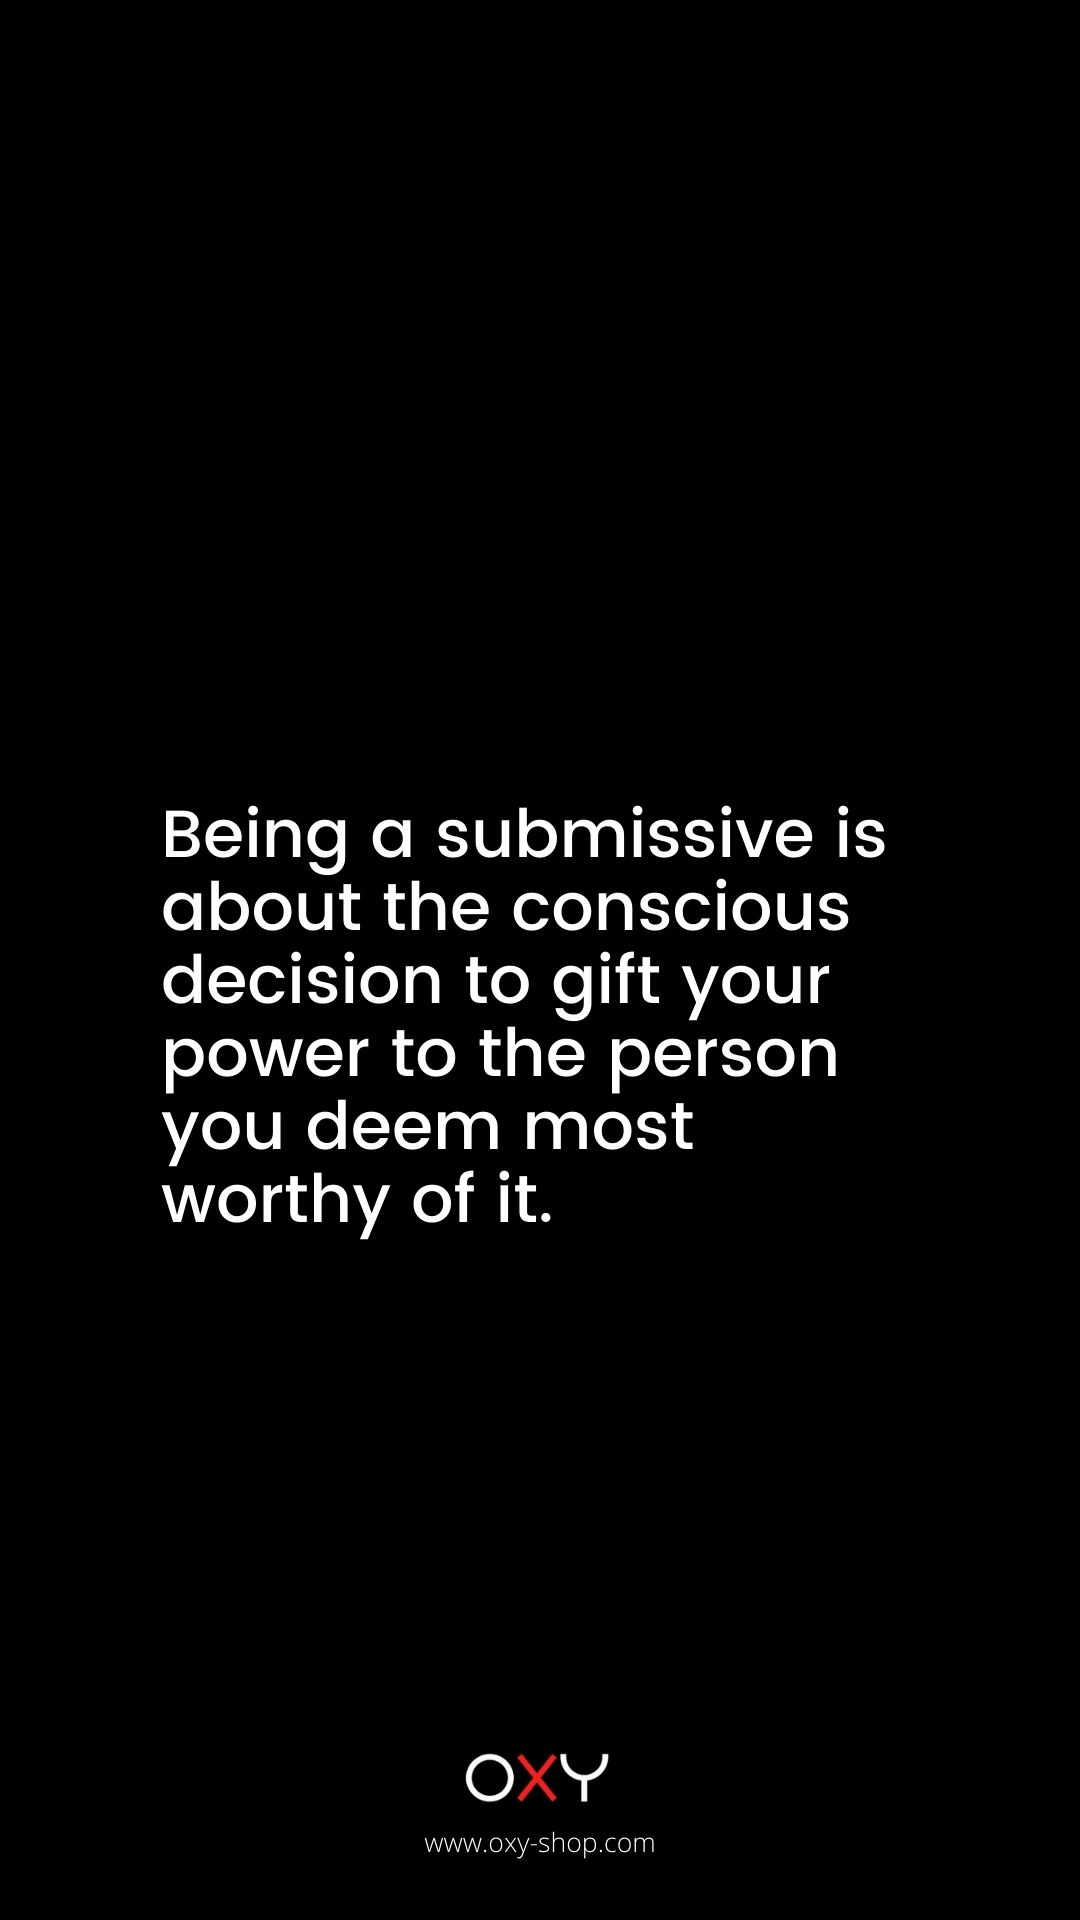 Being a submissive is about the conscious decision to gift your power to the person you deem most worthy of it. - BDSM wallpaper